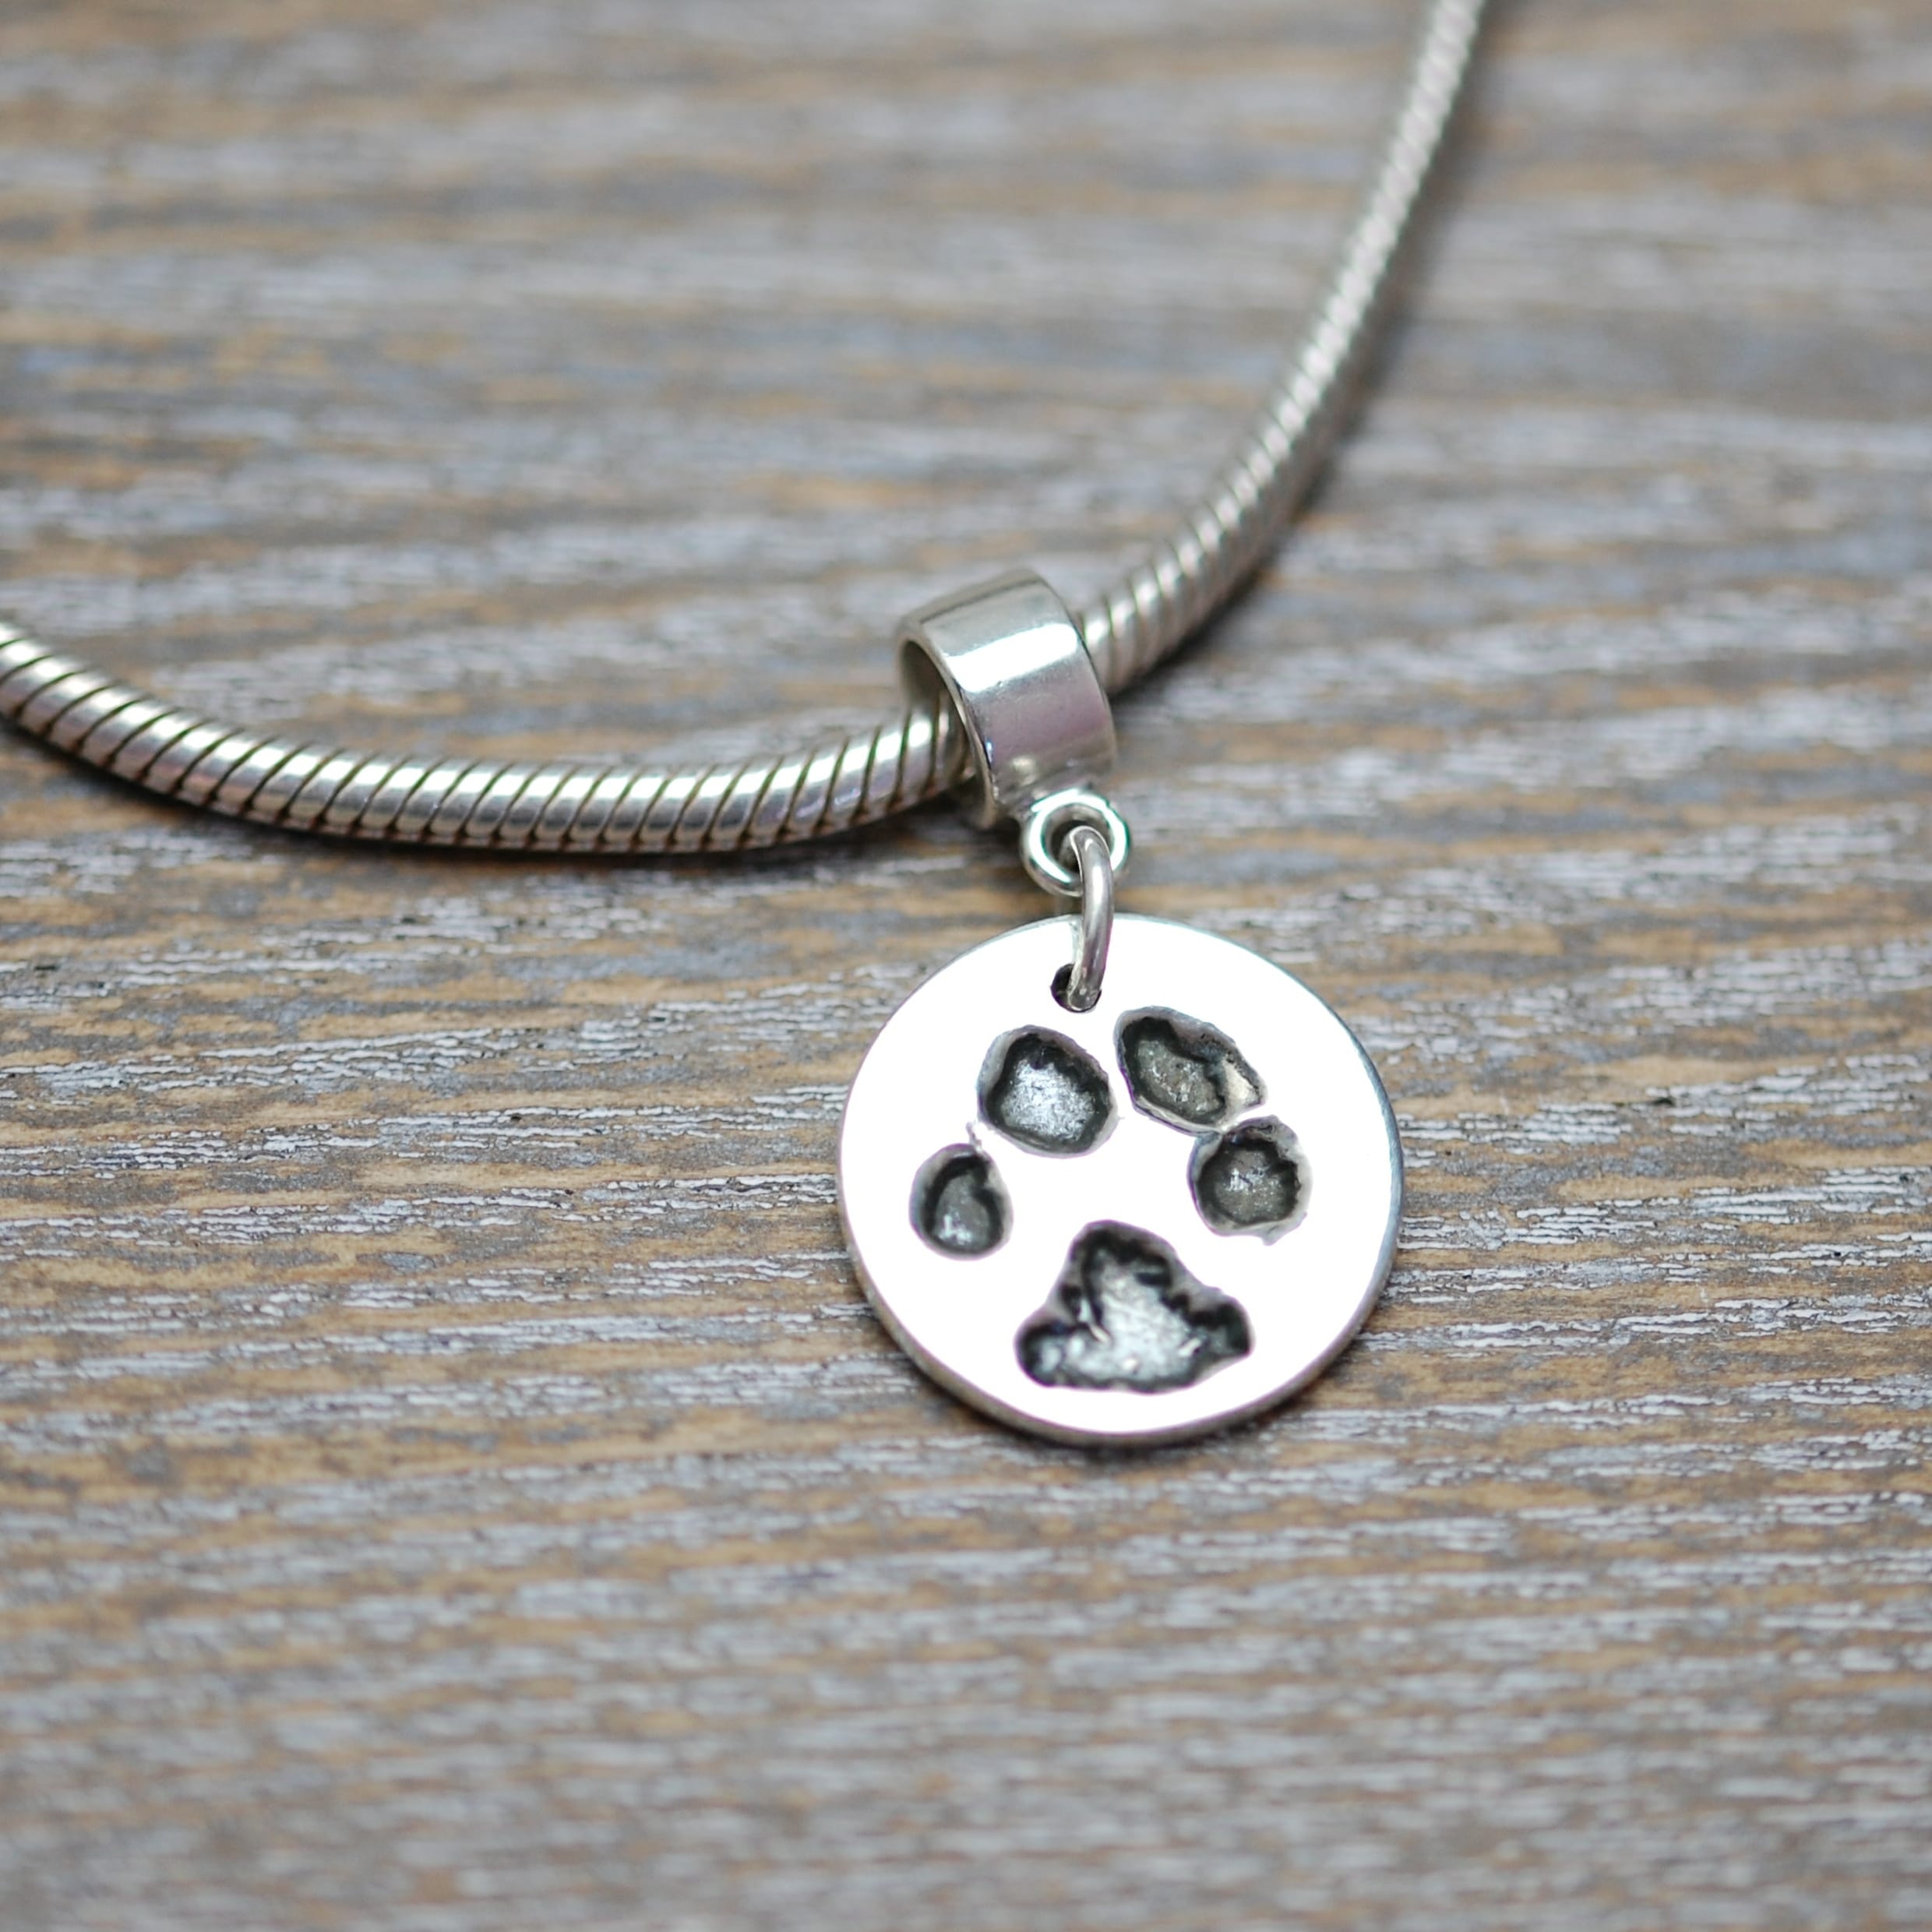 Silver circle paw print charm with charm carrier